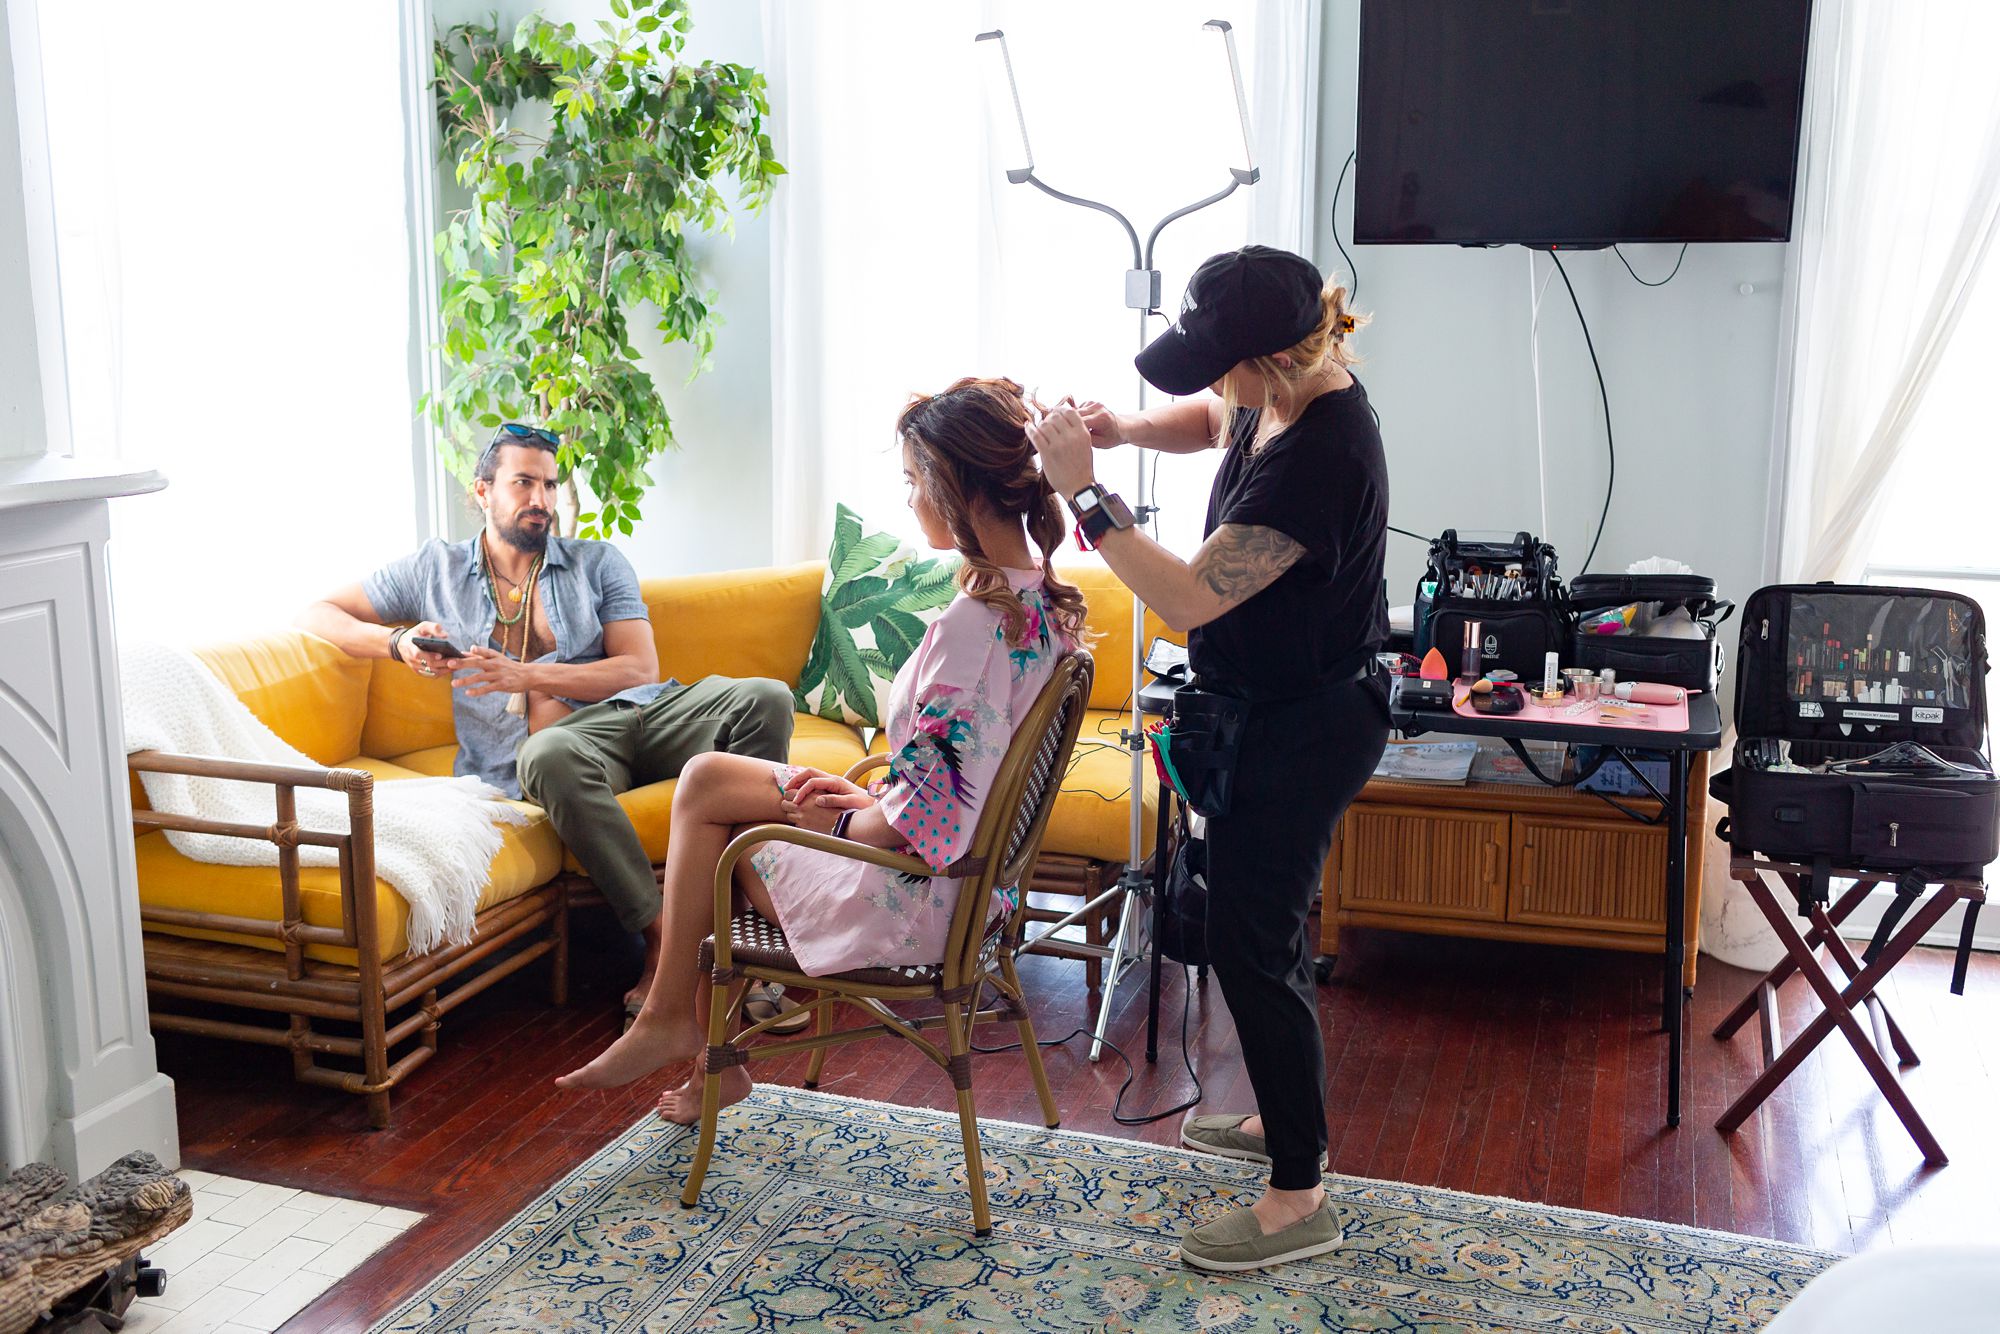 A groom sits on a couch while a hairstylist works on the a bride's hair.